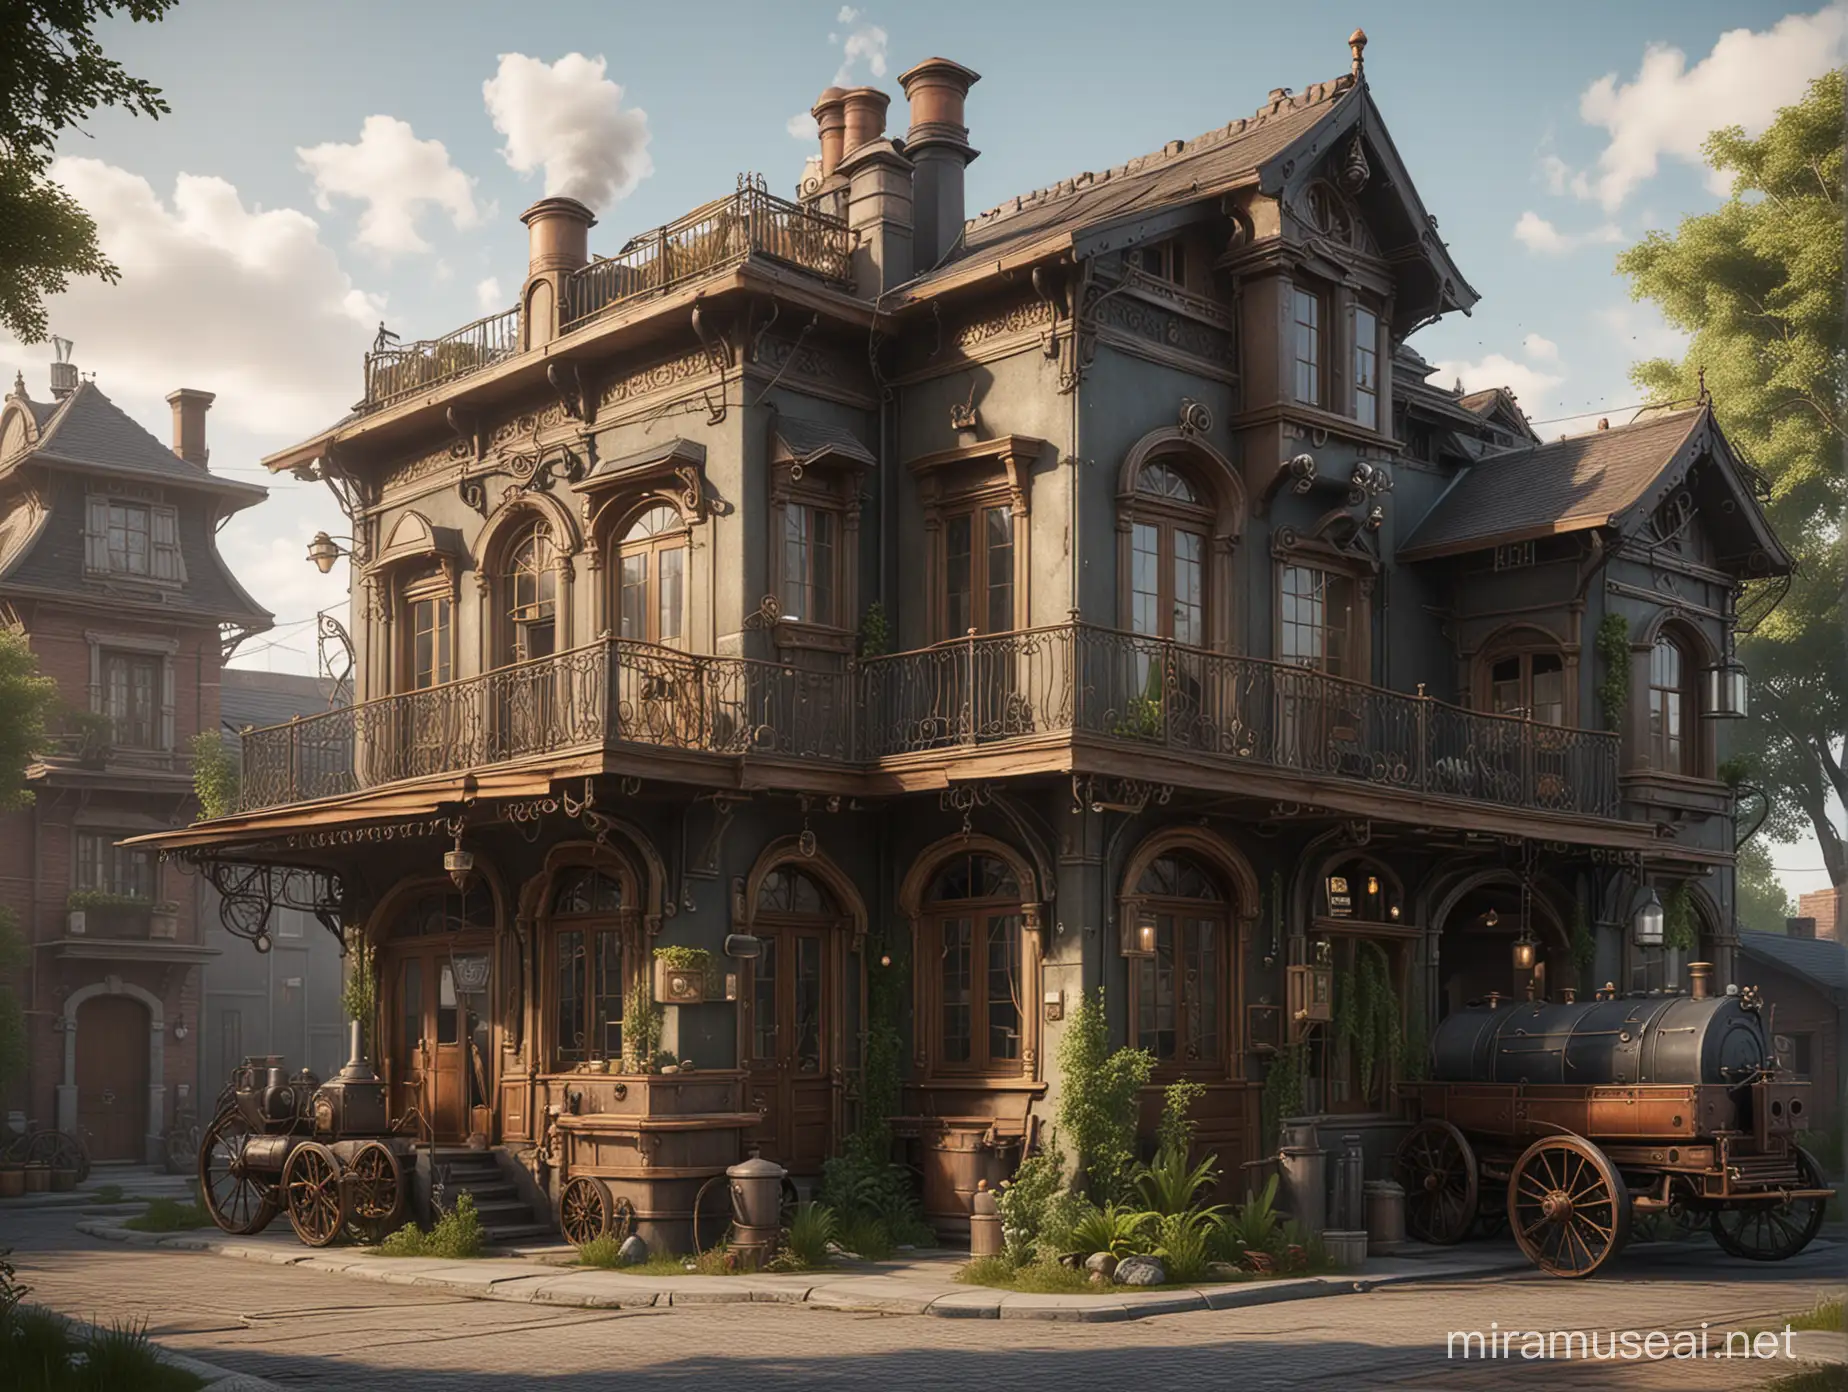 A two-story villa with one bedroom, two toilets on each floor, a small backyard, a spacious hall with two additional rooms & a balcony doubling as a kitchen, holds a secret book about slimes, steampunk, outside view, front door view, 3D Photorealistic, 3D Photo, Attractive, High Resolution, Detailed, artistic, fantasy, steampunk villa, house, steamcar parked outside, smokes and factories, cozy, dark air, steampunk style house, gold rims, luxary.